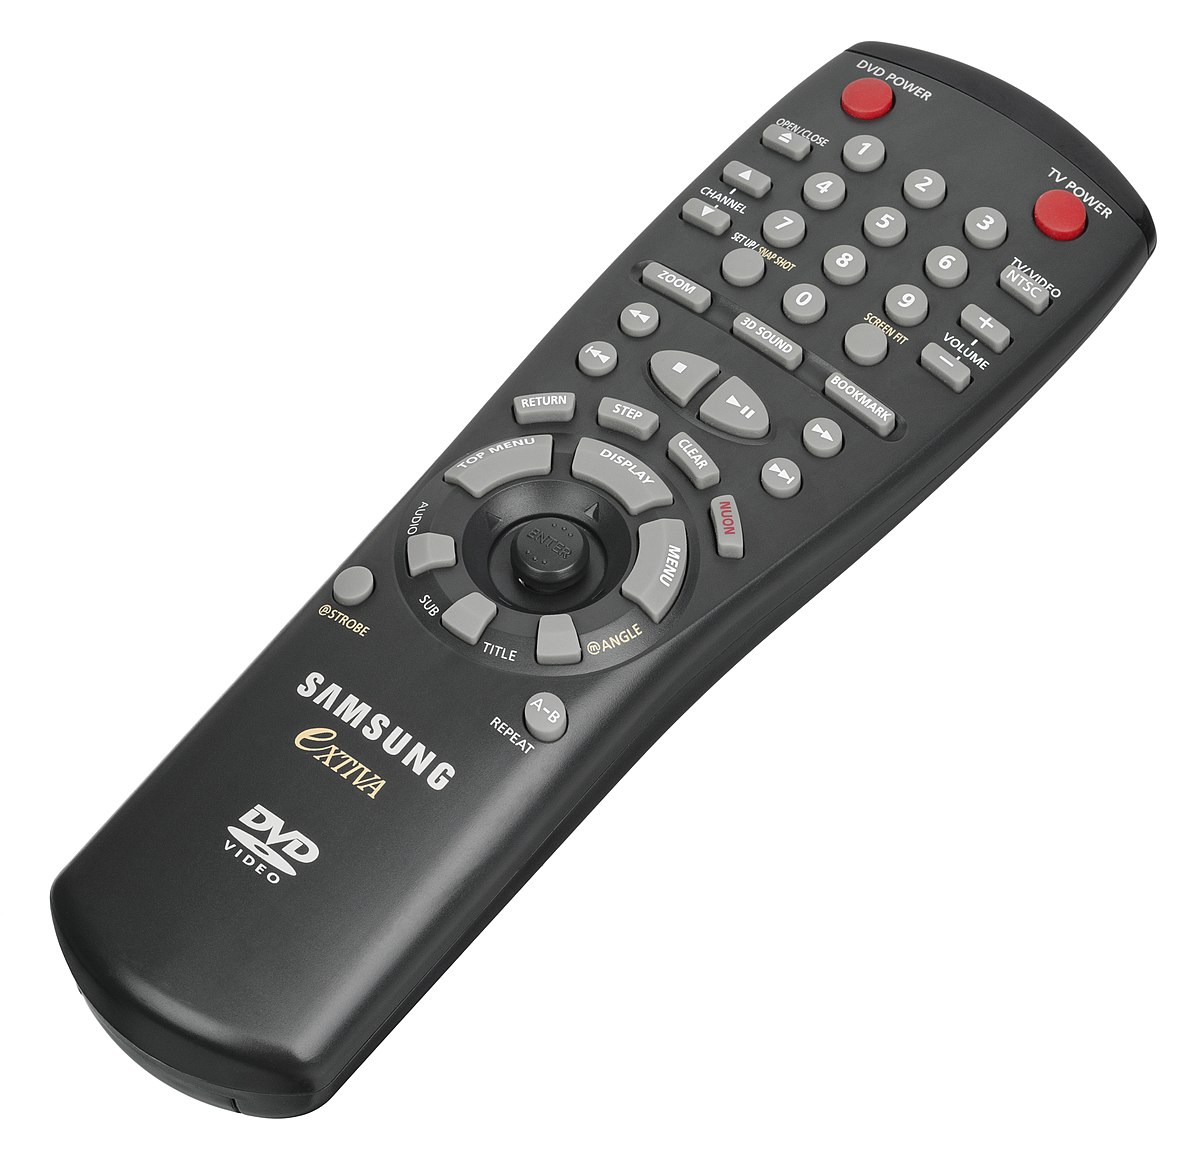 https://upload.wikimedia.org/wikipedia/commons/thumb/f/f7/Nuon-N2000-Remote-Control.jpg/1200px-Nuon-N2000-Remote-Control.jpg